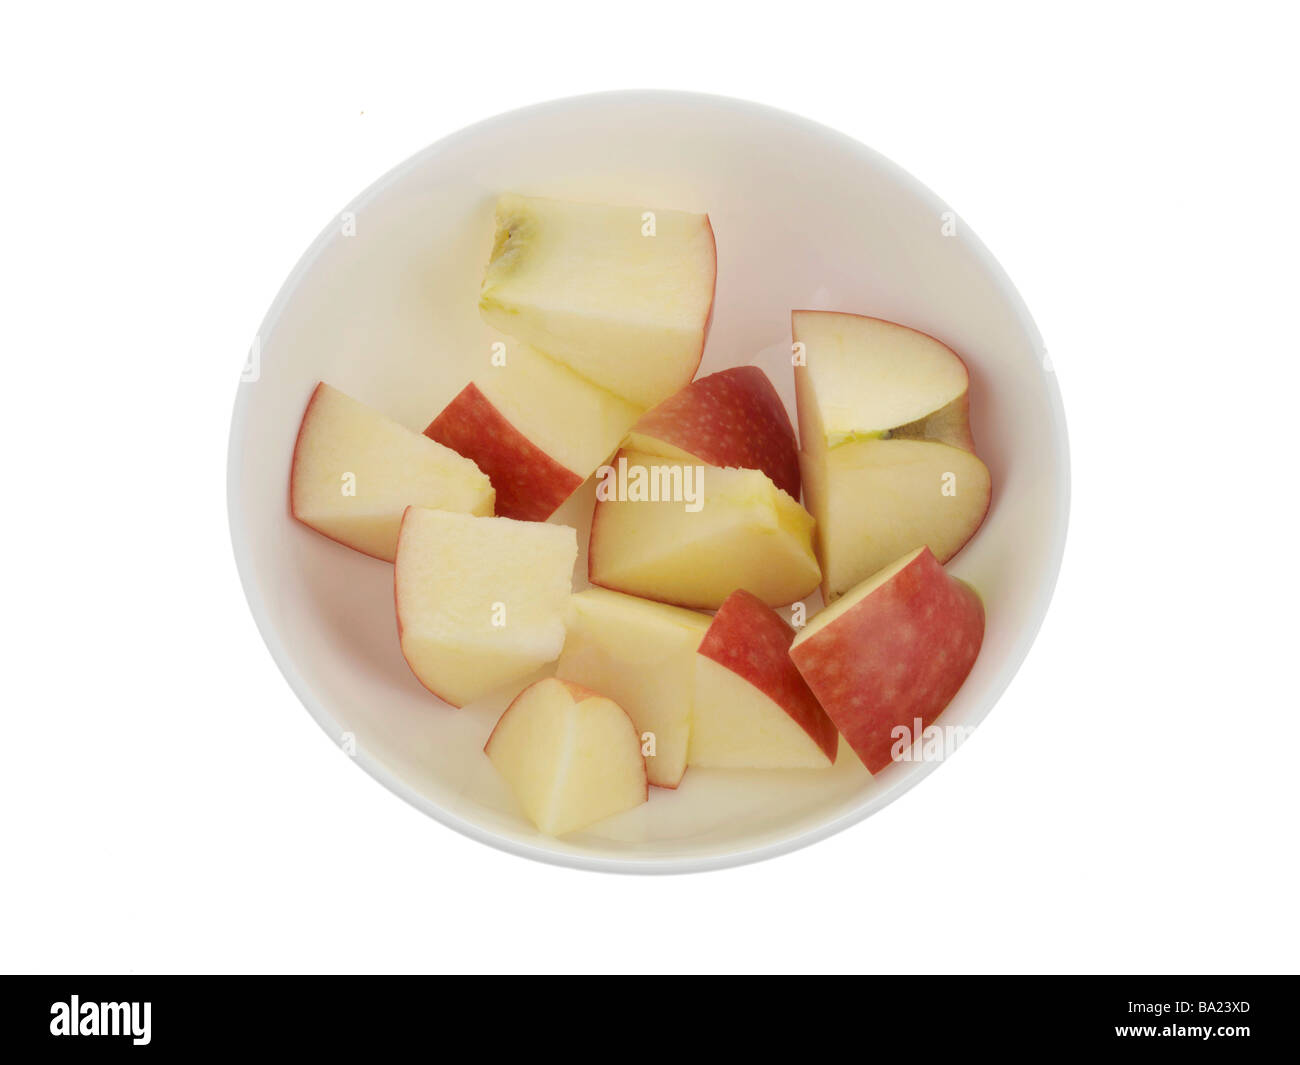 Fresh Ripe Healthy Chopped Red Apple in a Bowl Isolated Against A White Background With No People And A Clipping Path Stock Photo